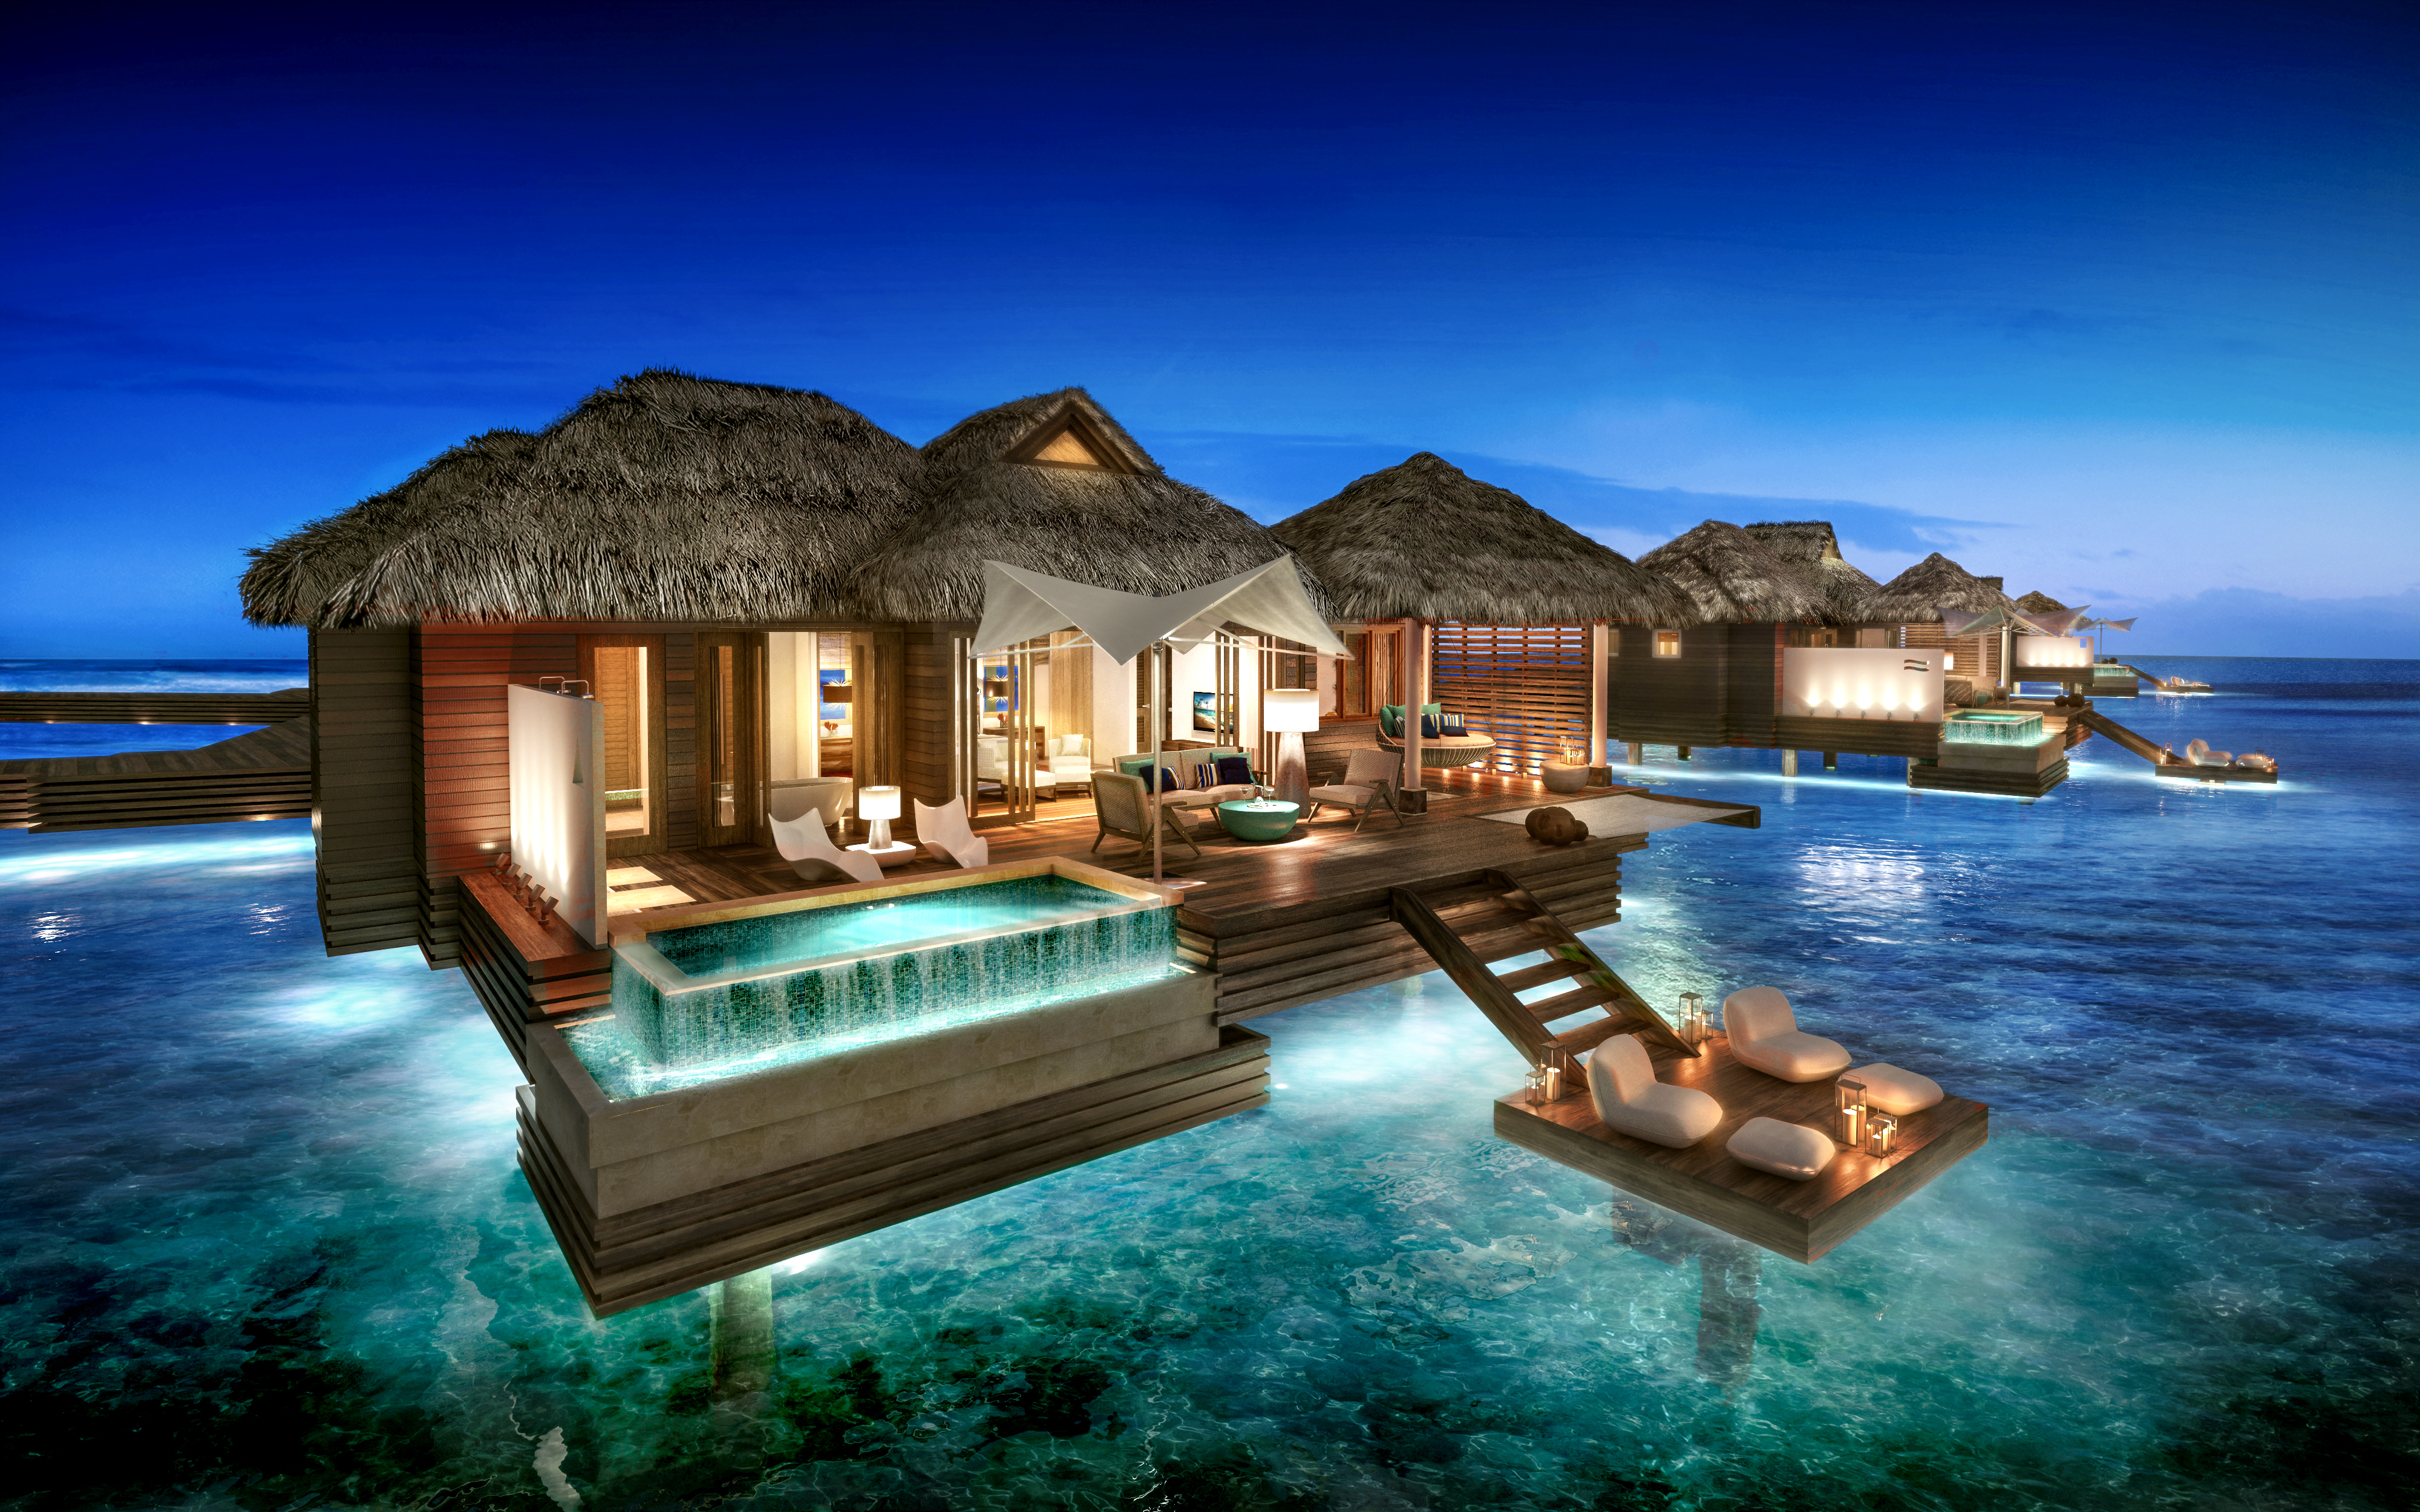 All-Inclusive Overwater Bungalow Resort in the Caribbean | Private Island Overwater Bungalow | Caribbean Overwater Suites